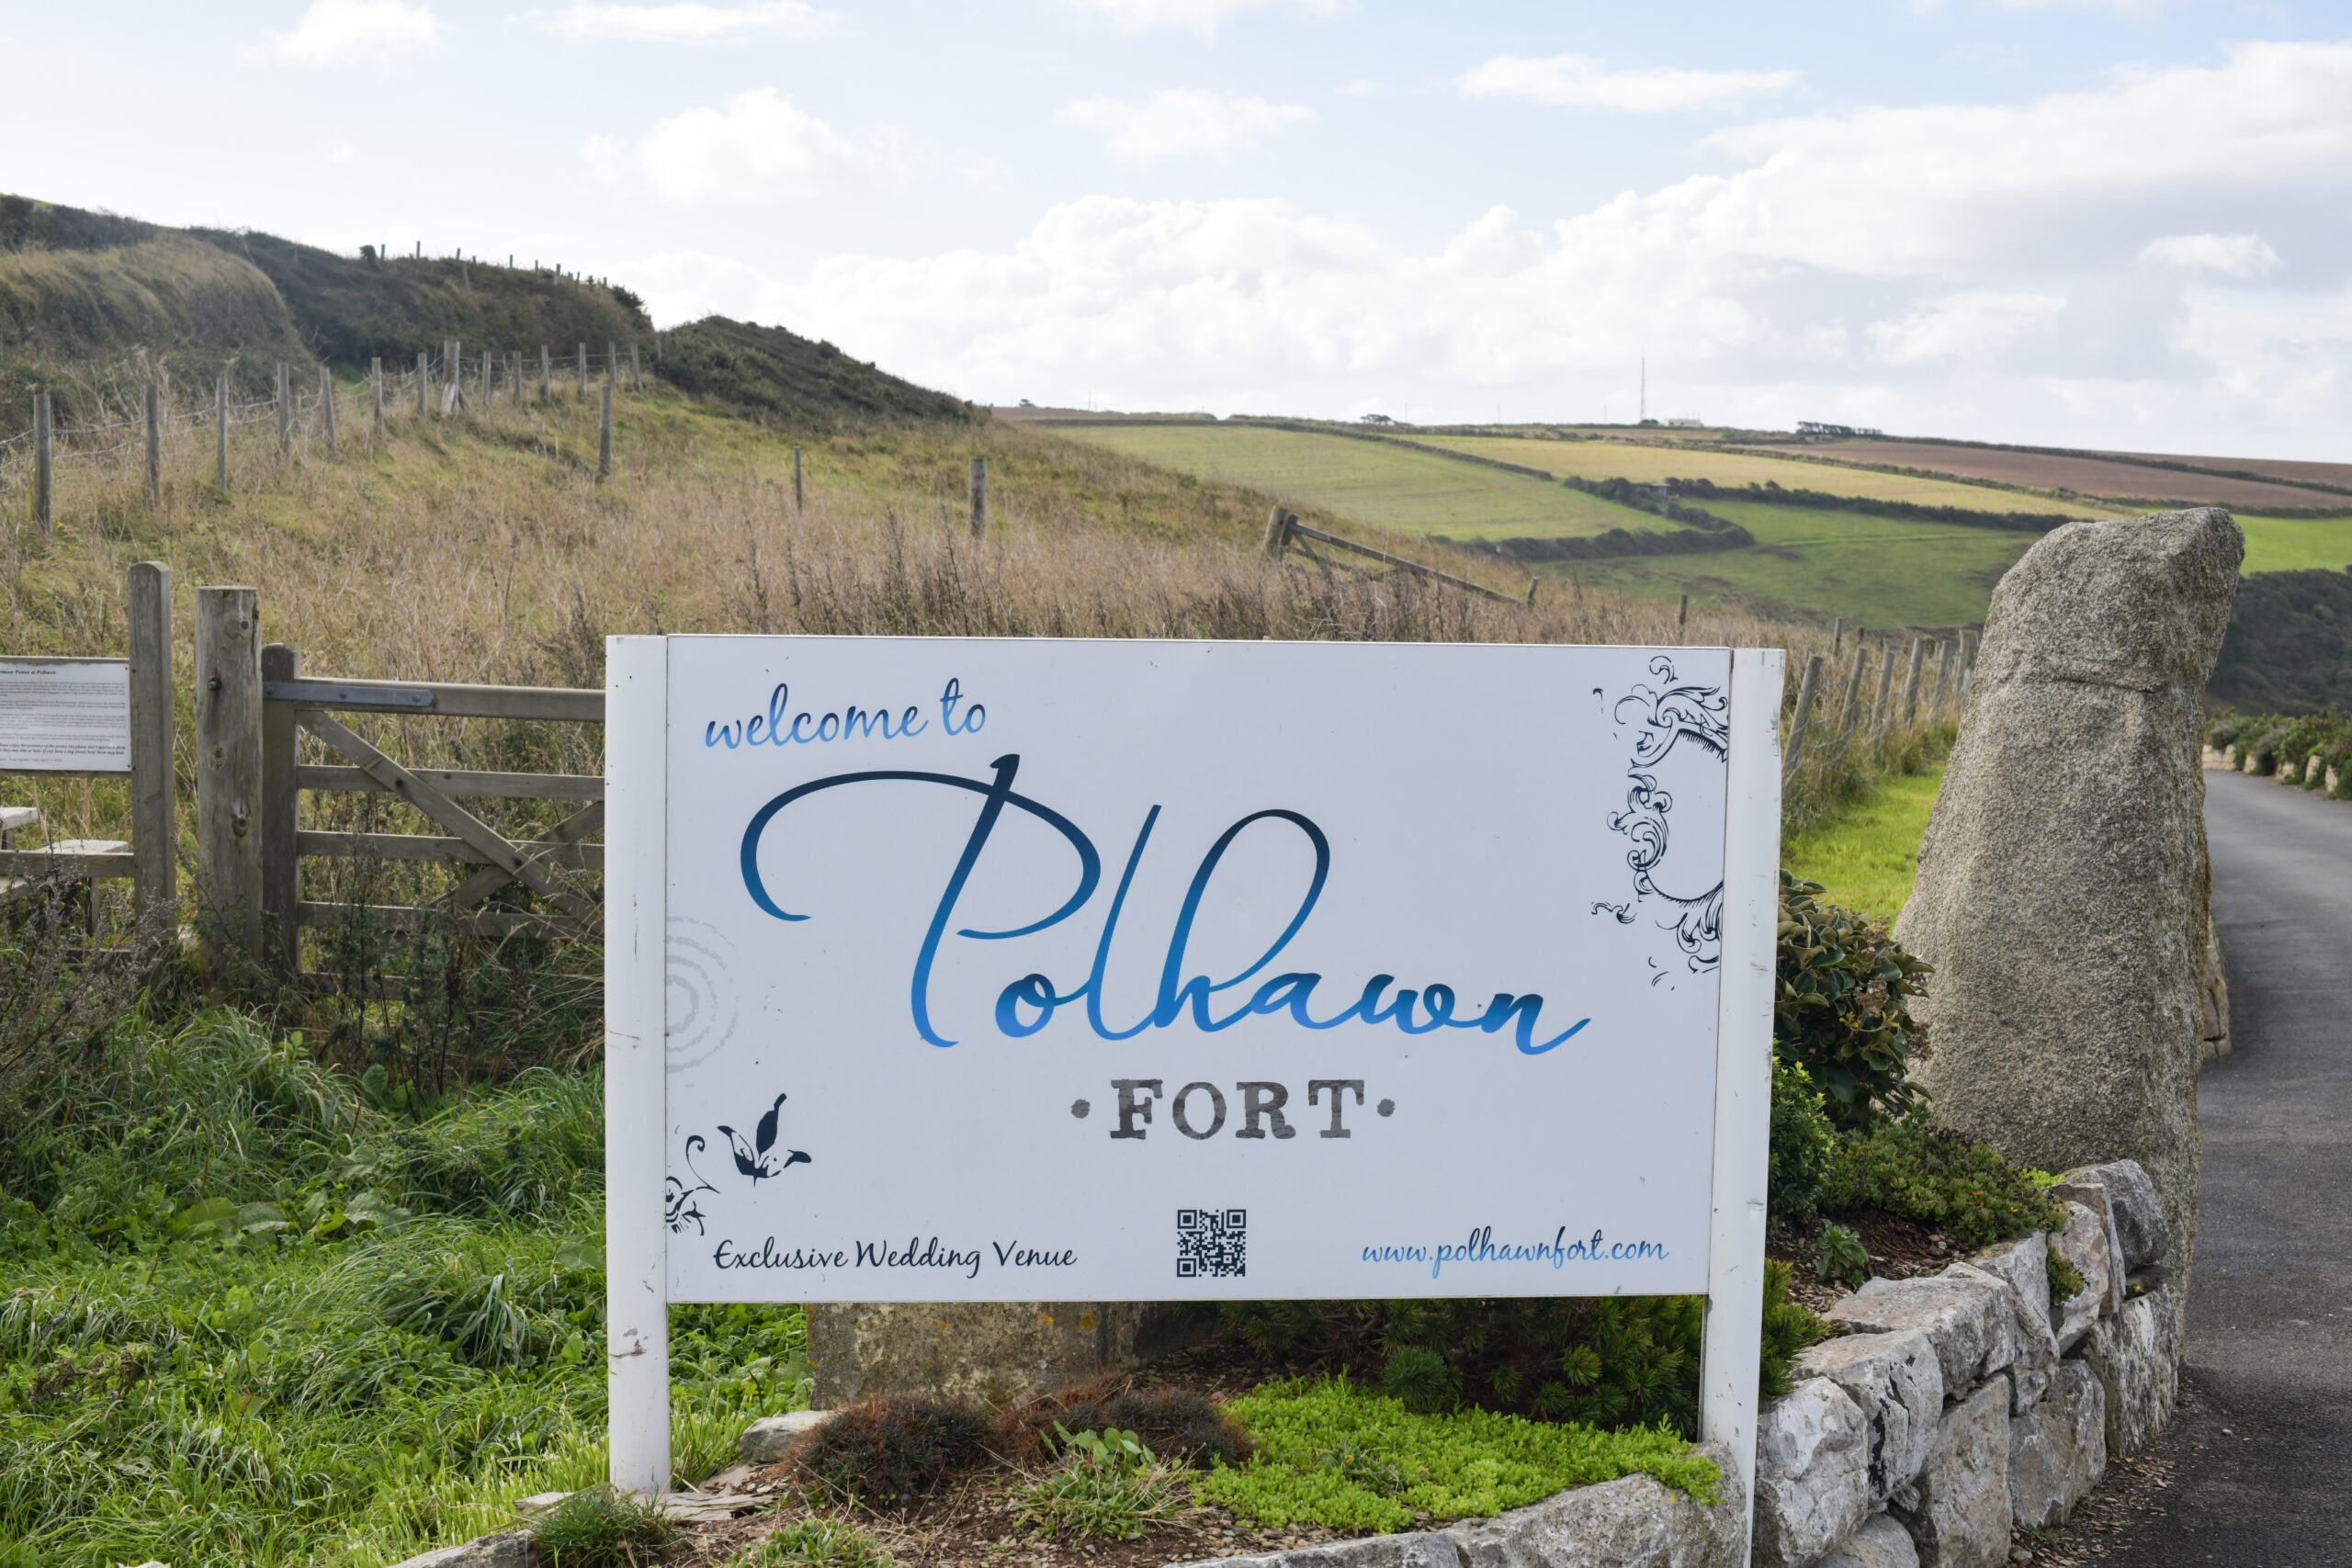 Wedding Photography Polhawn Fort 1 Bepton Rd, Rame Head, Torpoint PL10 1LL